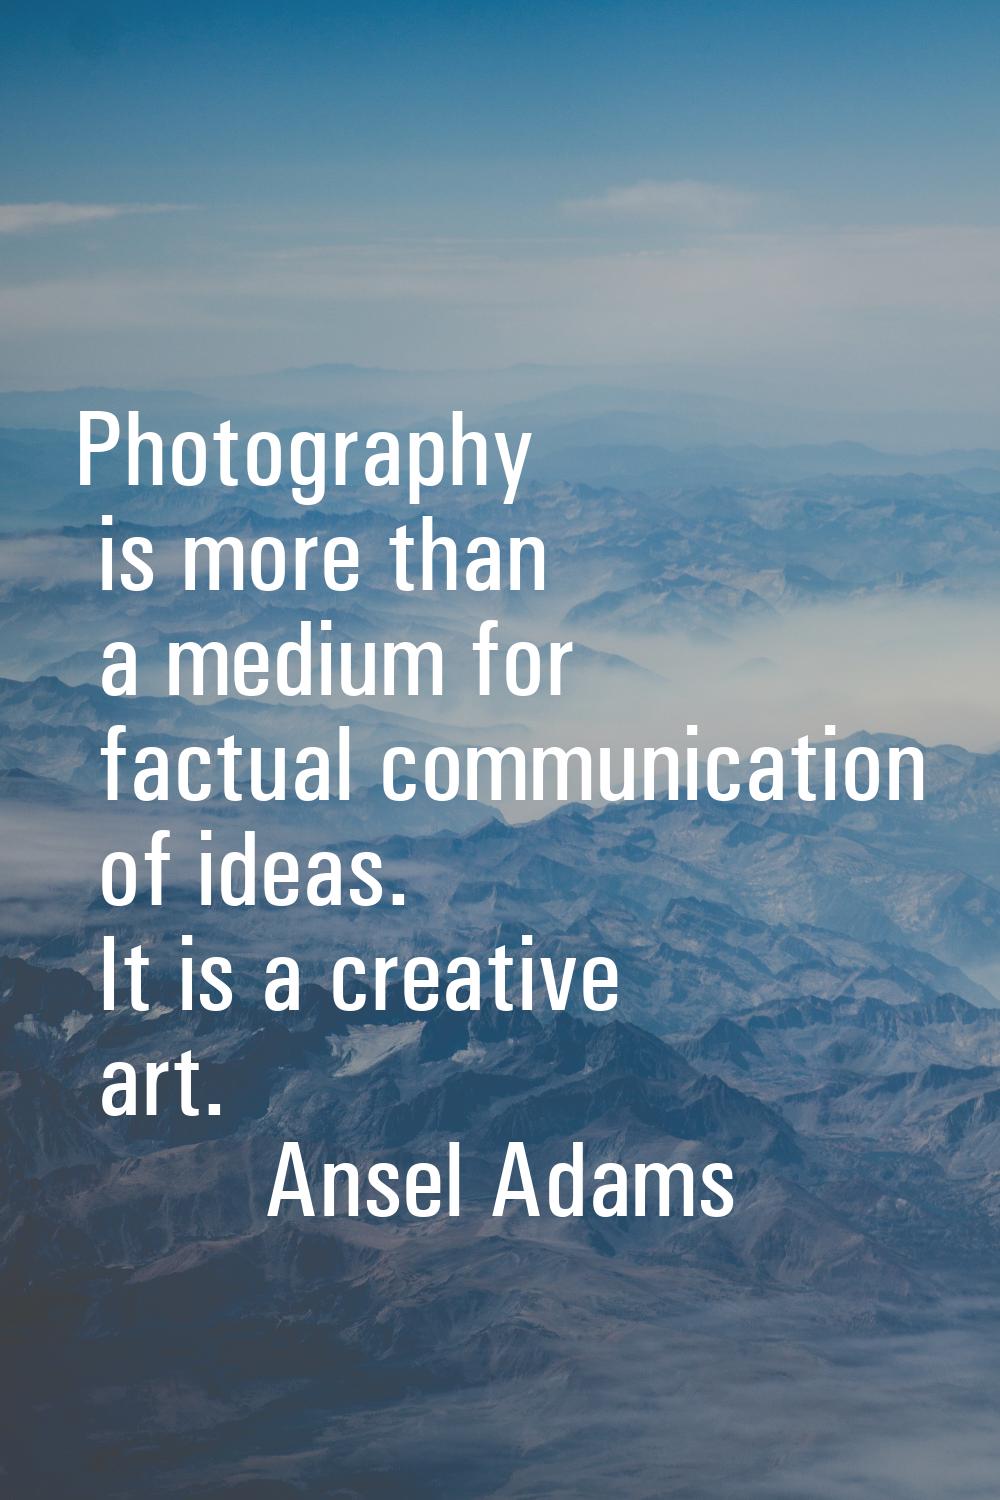 Photography is more than a medium for factual communication of ideas. It is a creative art.